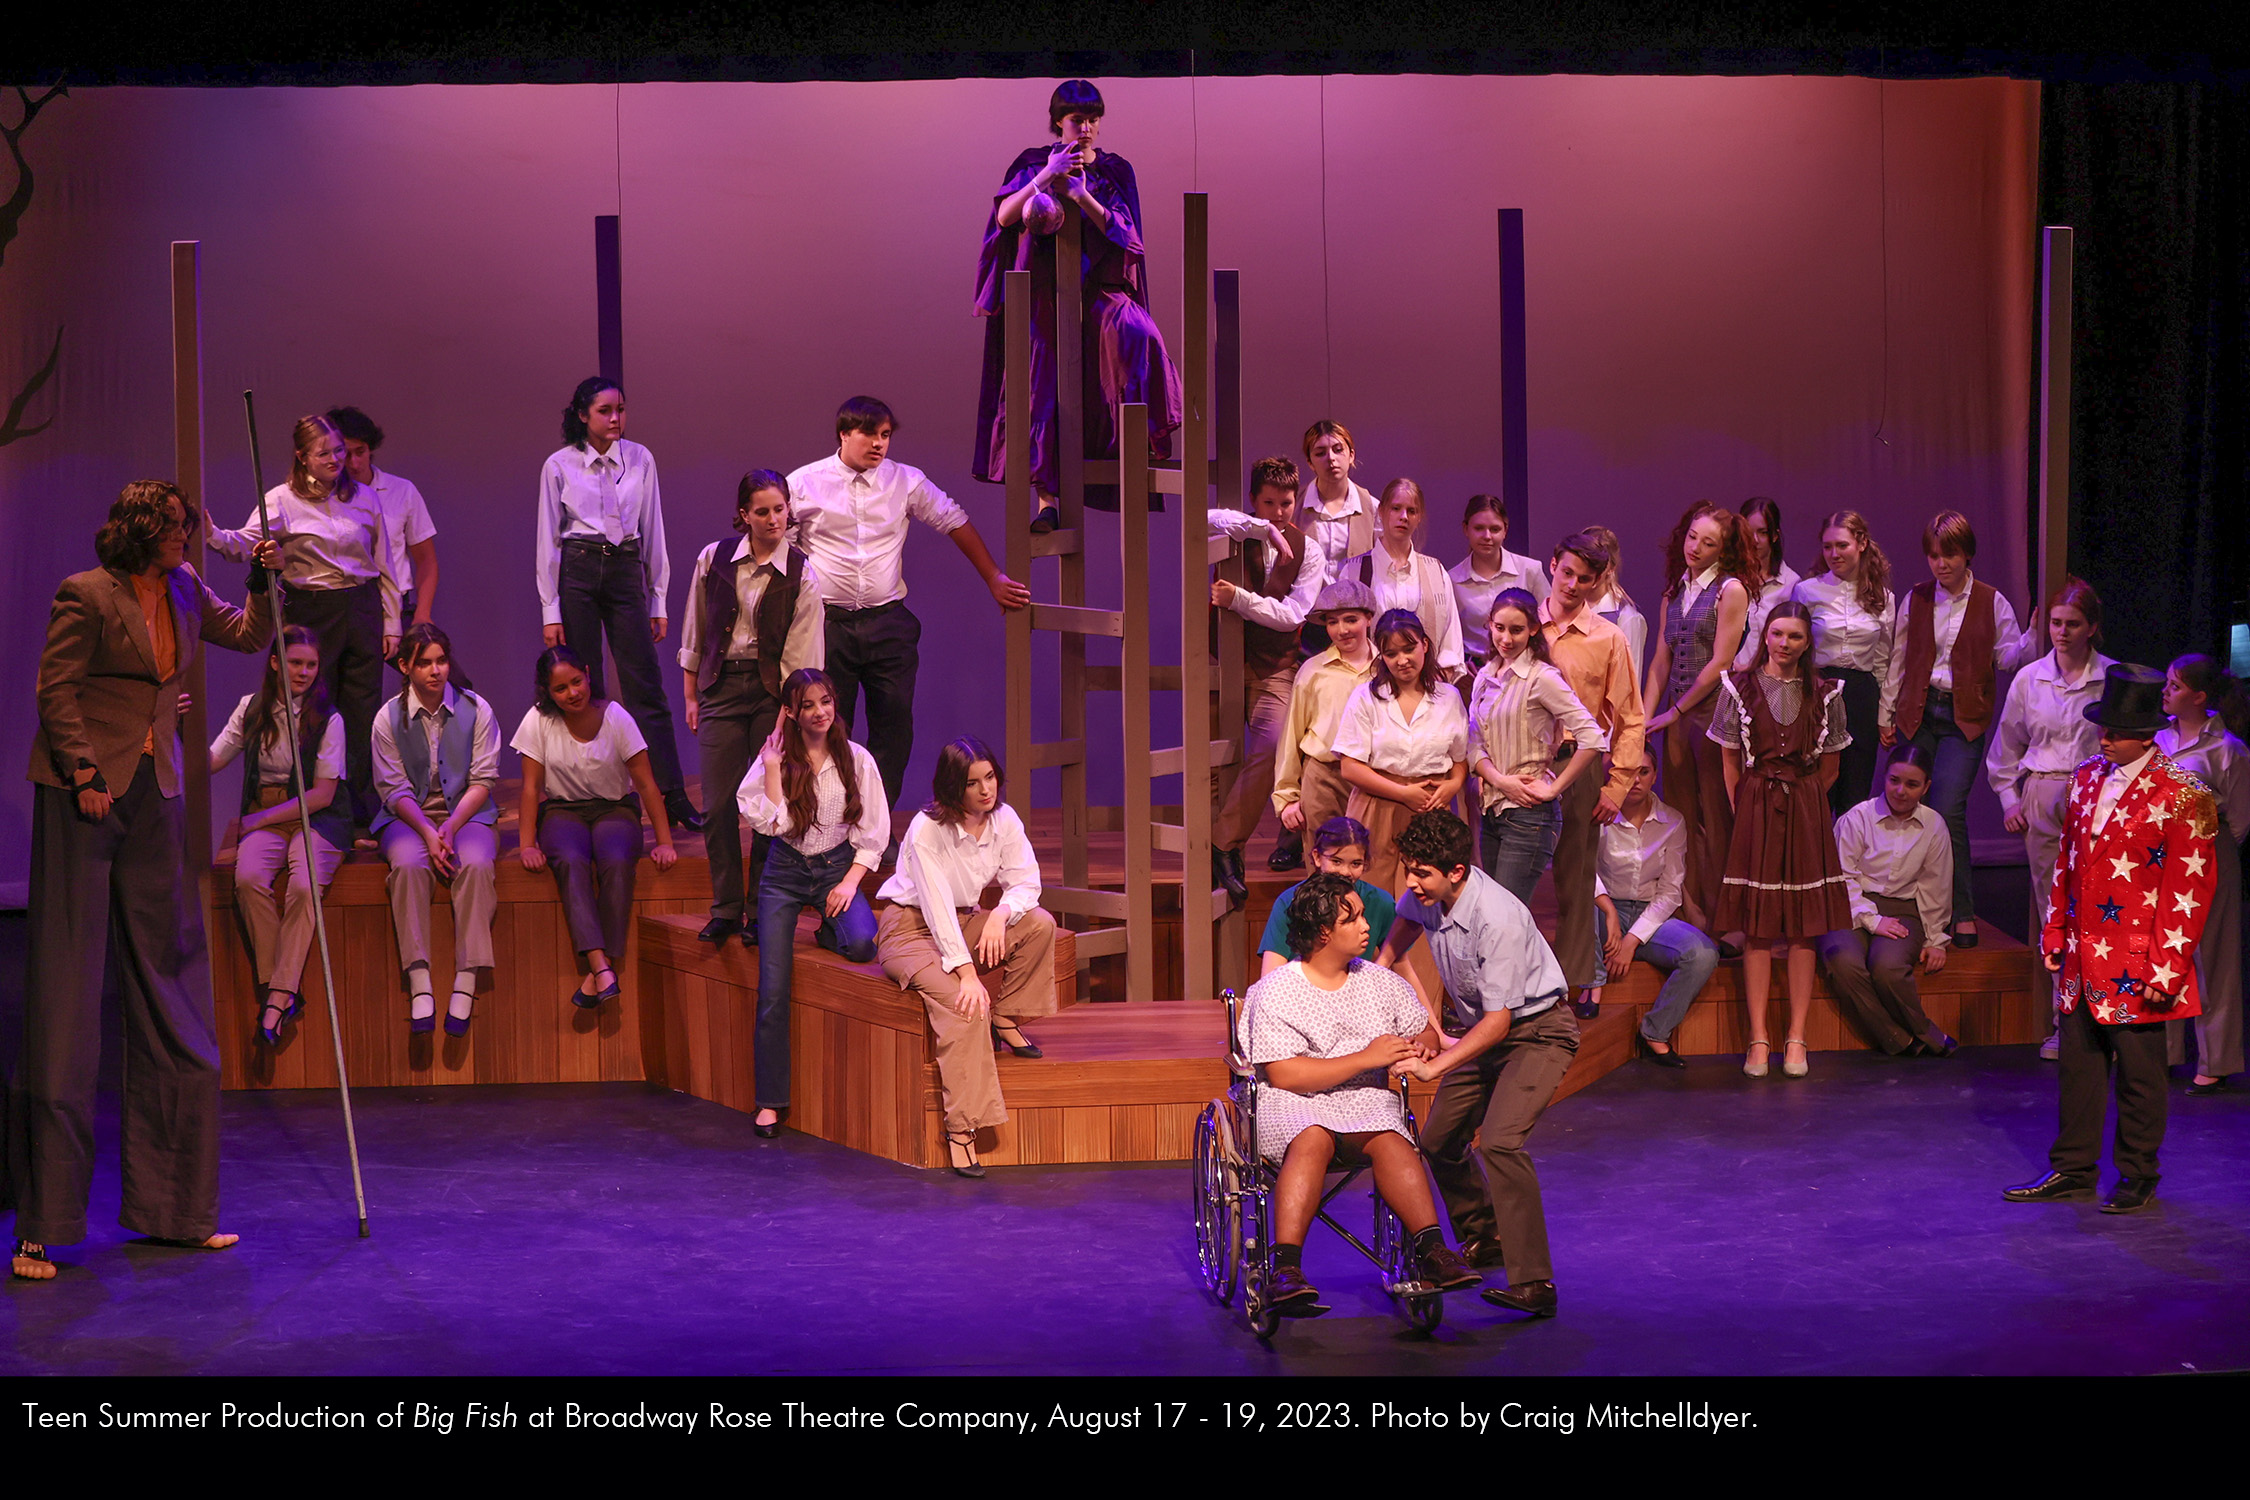 Teen Summer Production of Big Fish at Broadway Rose Theatre Company, August 17 - 19, 2023. Photo by Craig Mitchelldyer.